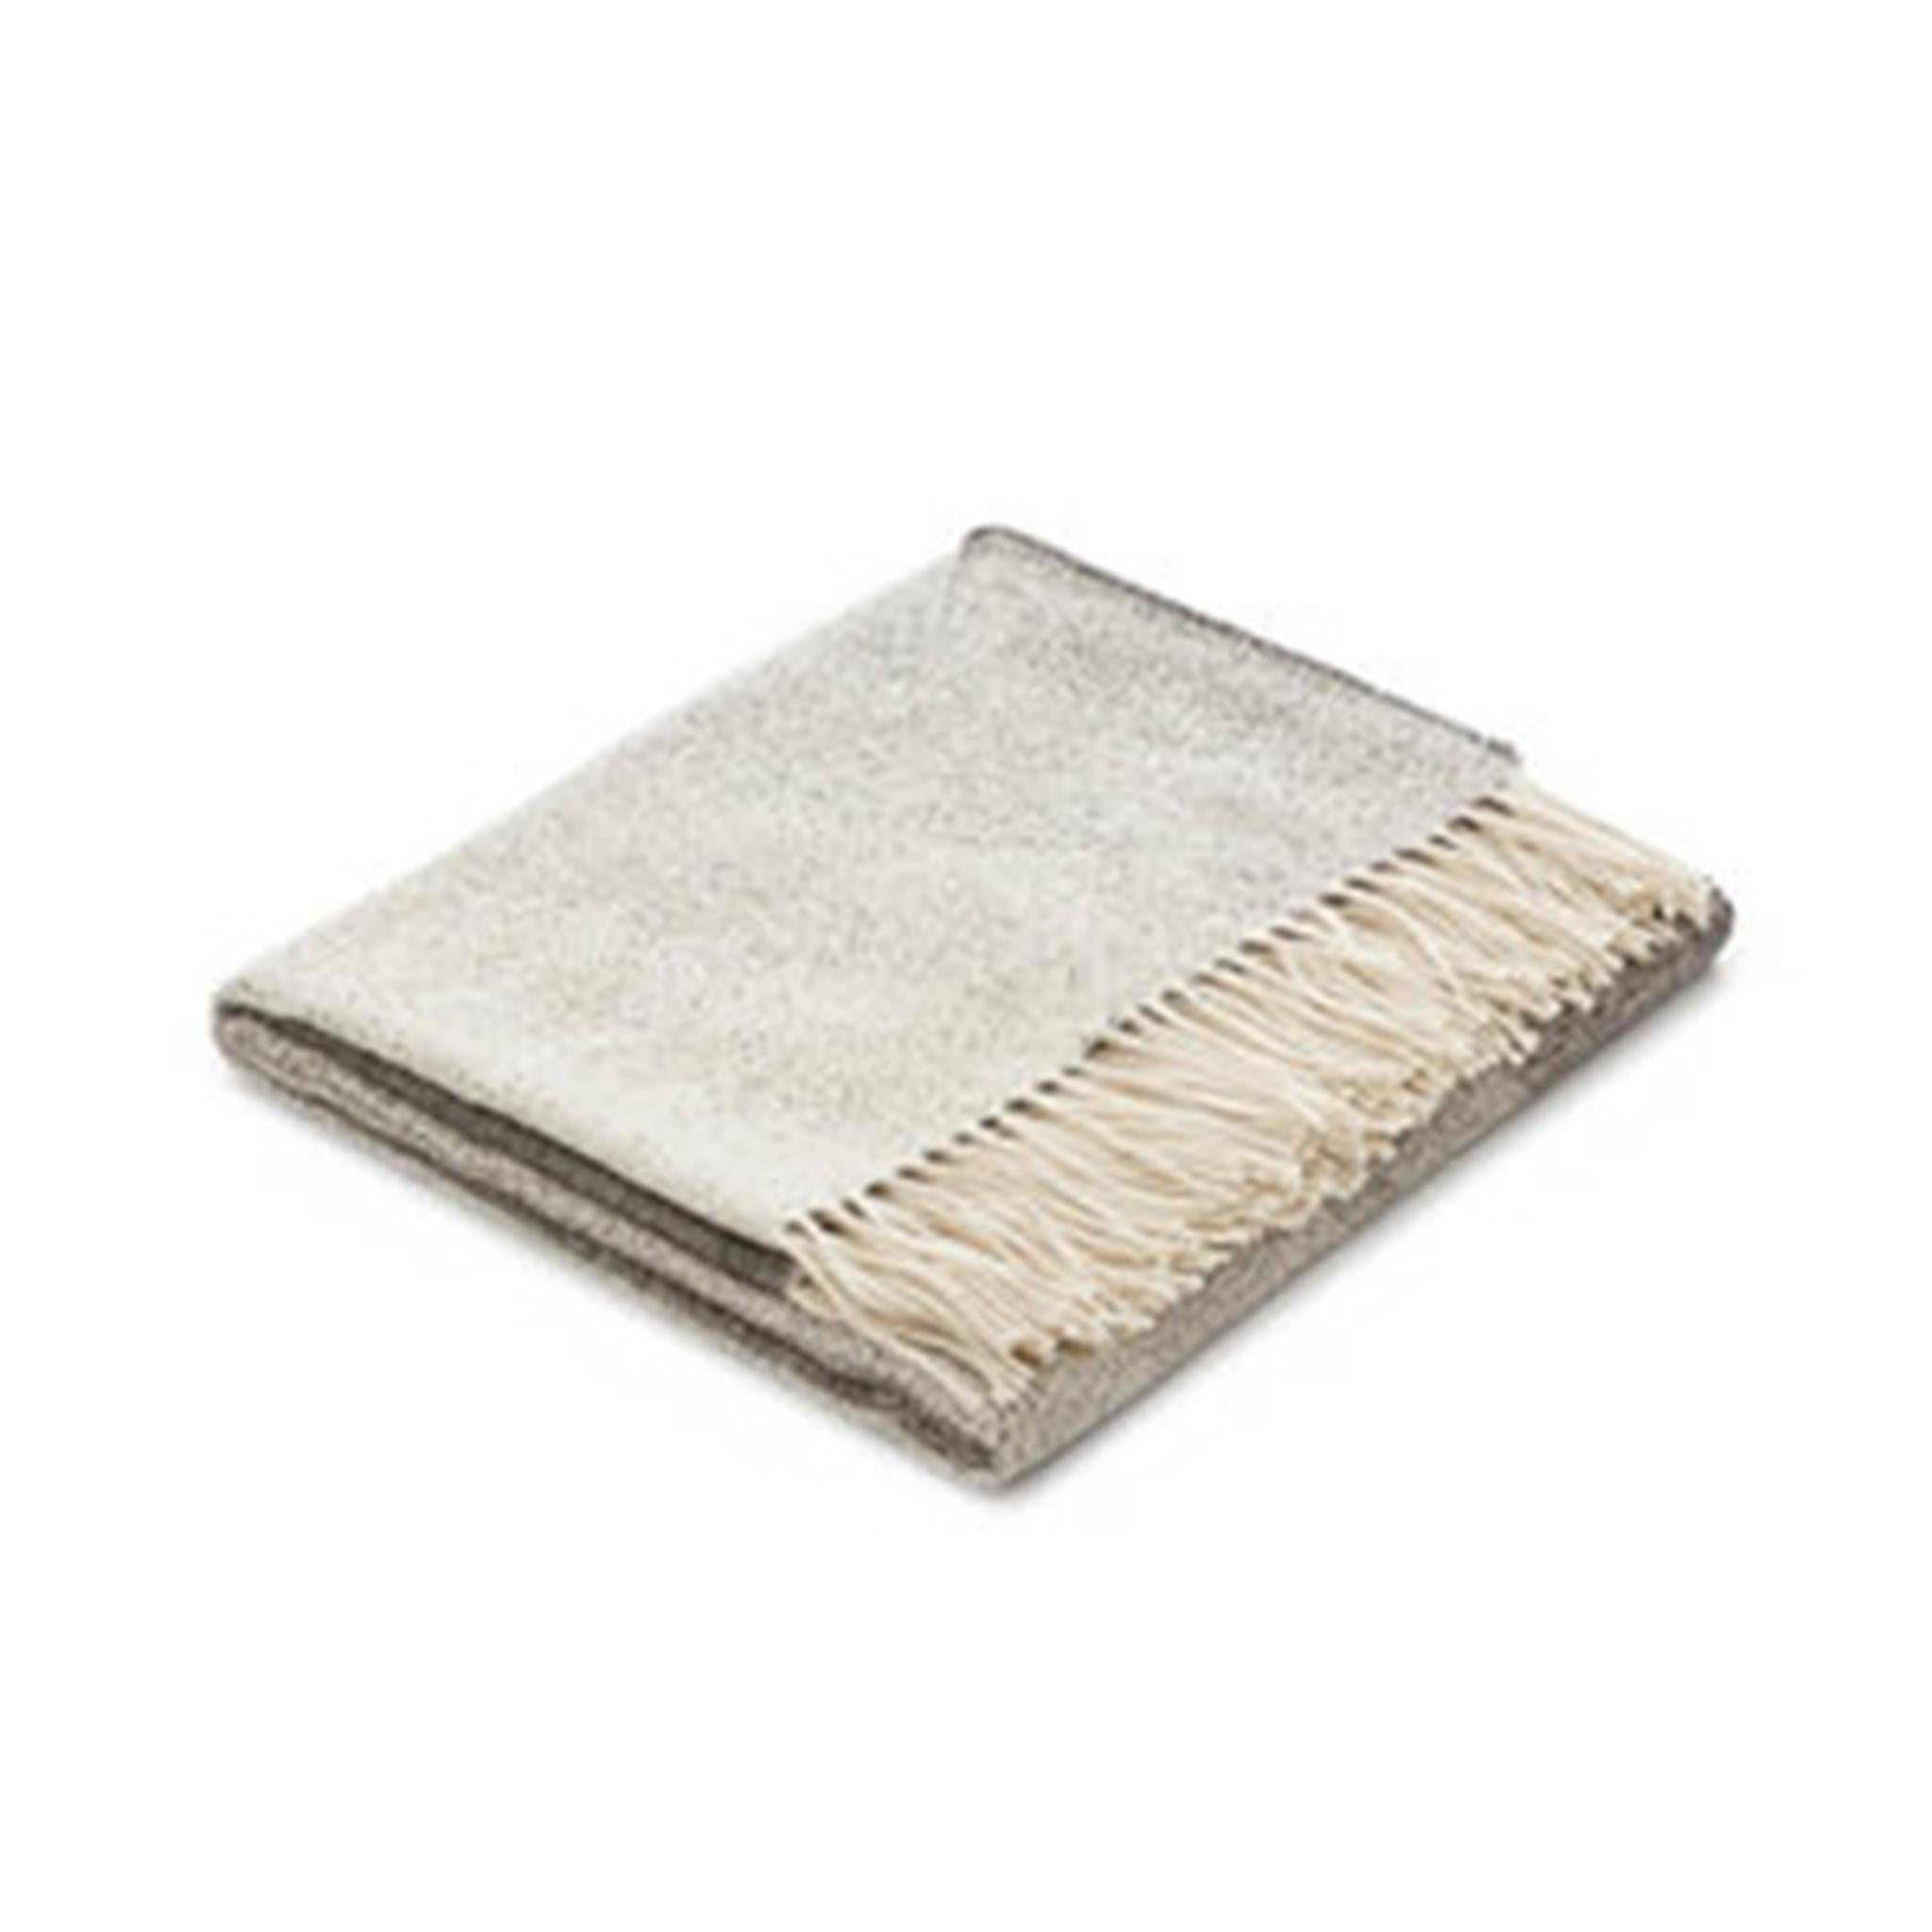 Modern Luft Throw 100% Baby Alpaca by Fells Andes  (FREE SHIPPING) For Sale